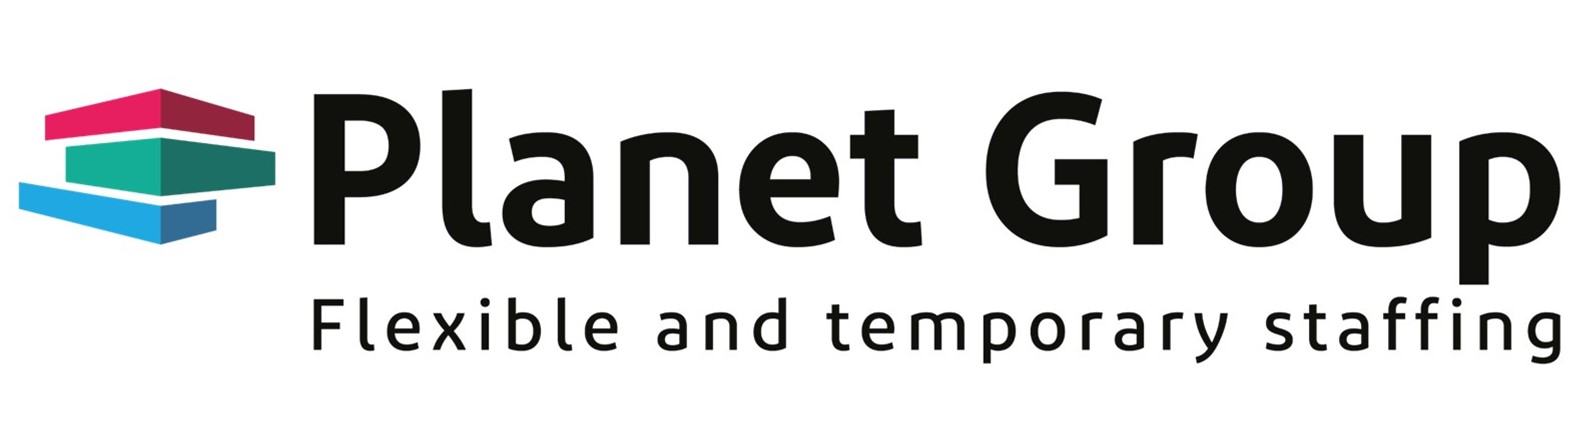 planet group